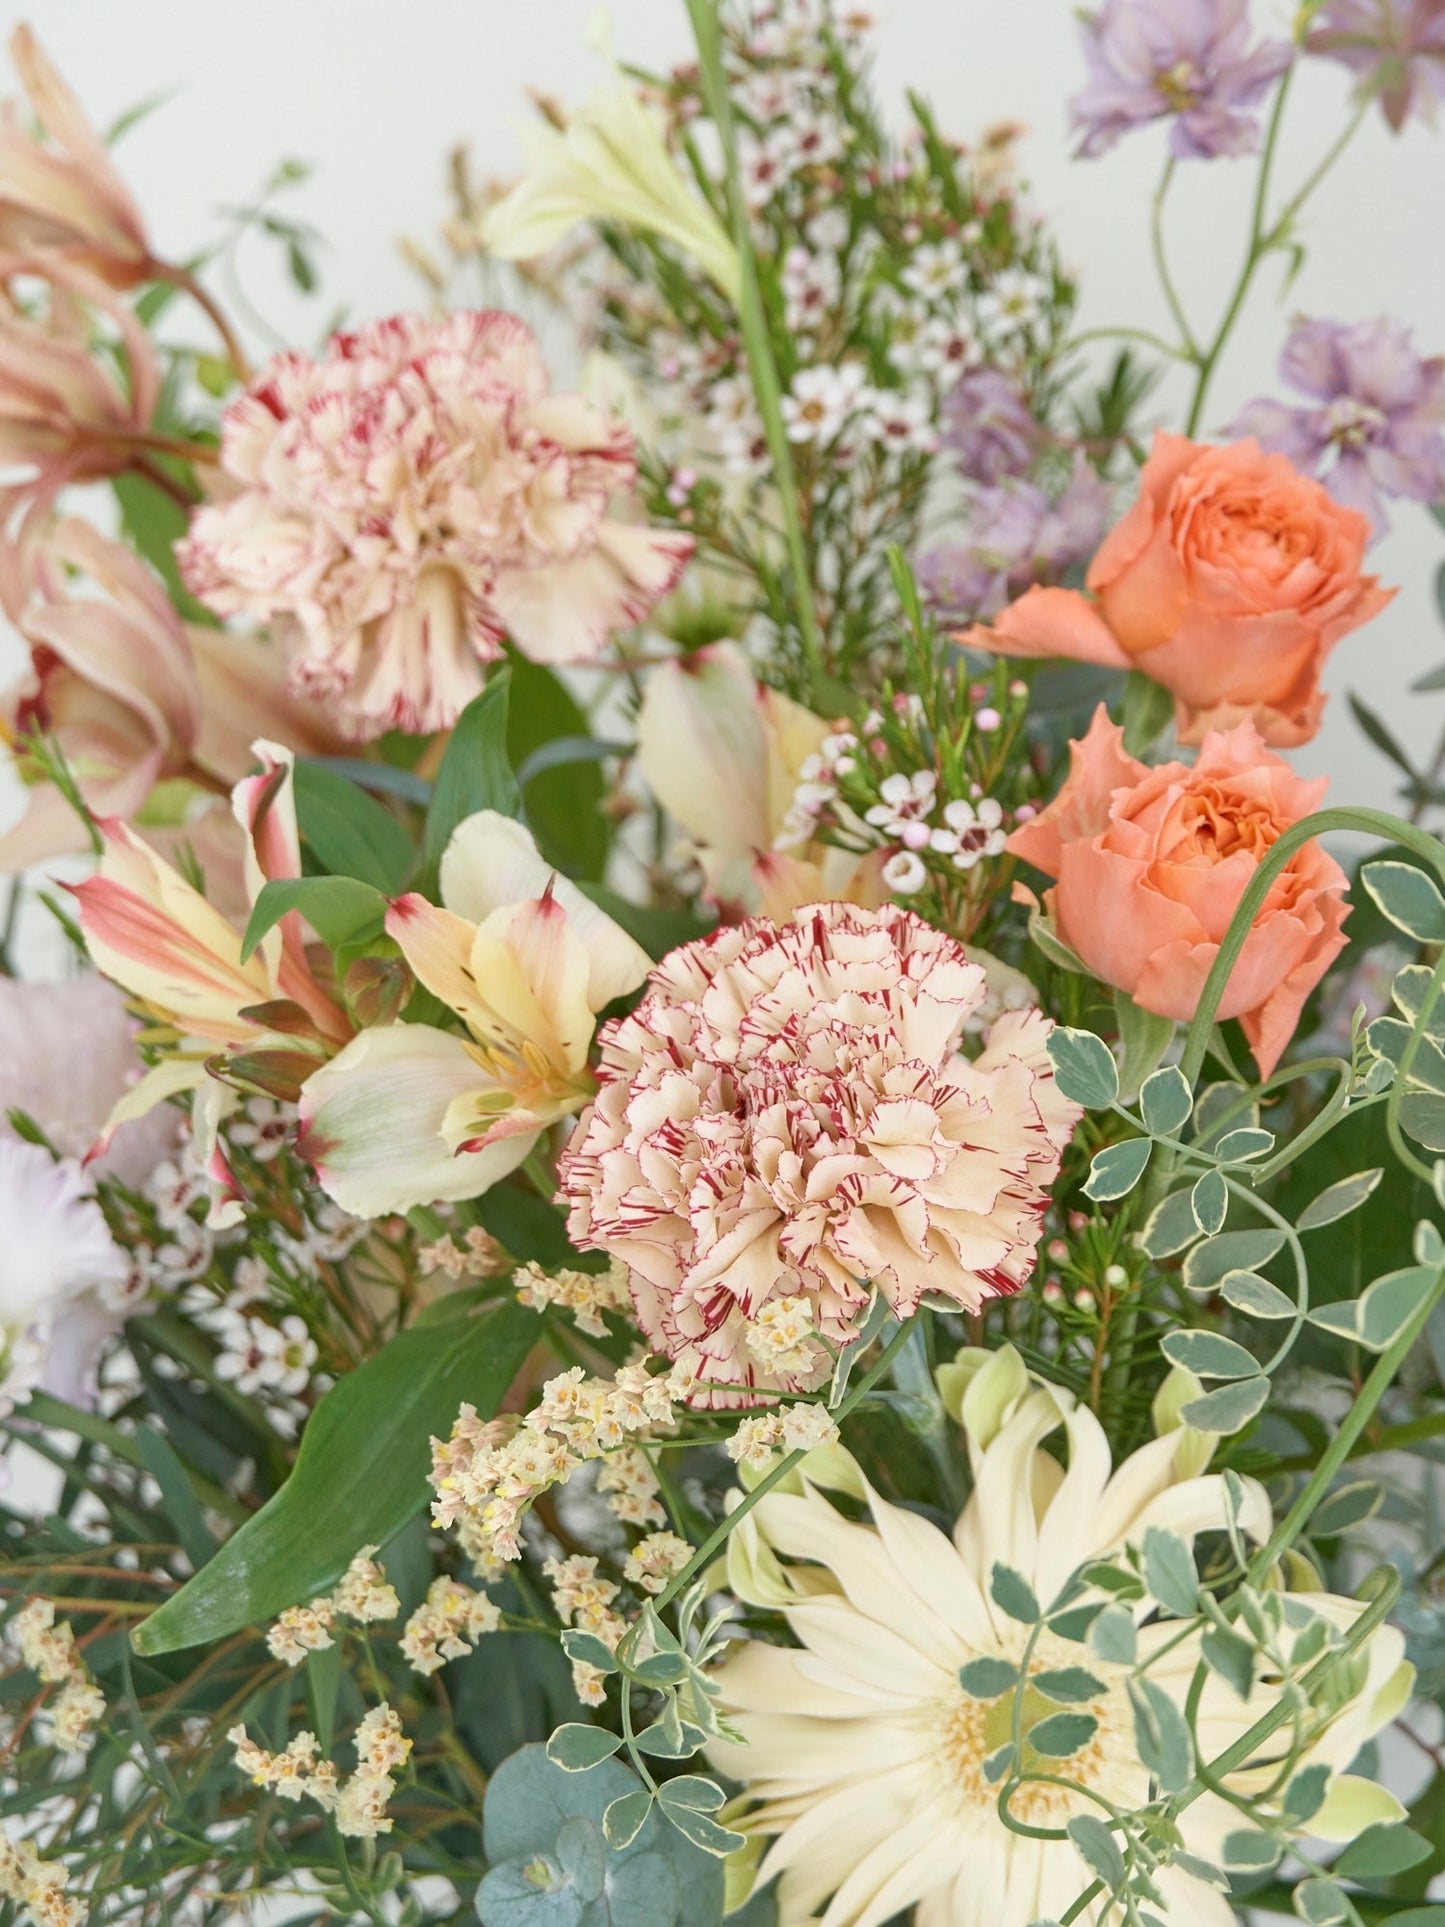 【mother's day】bouquet L and vase set 【Delivery date: 5/11 (Sat)】